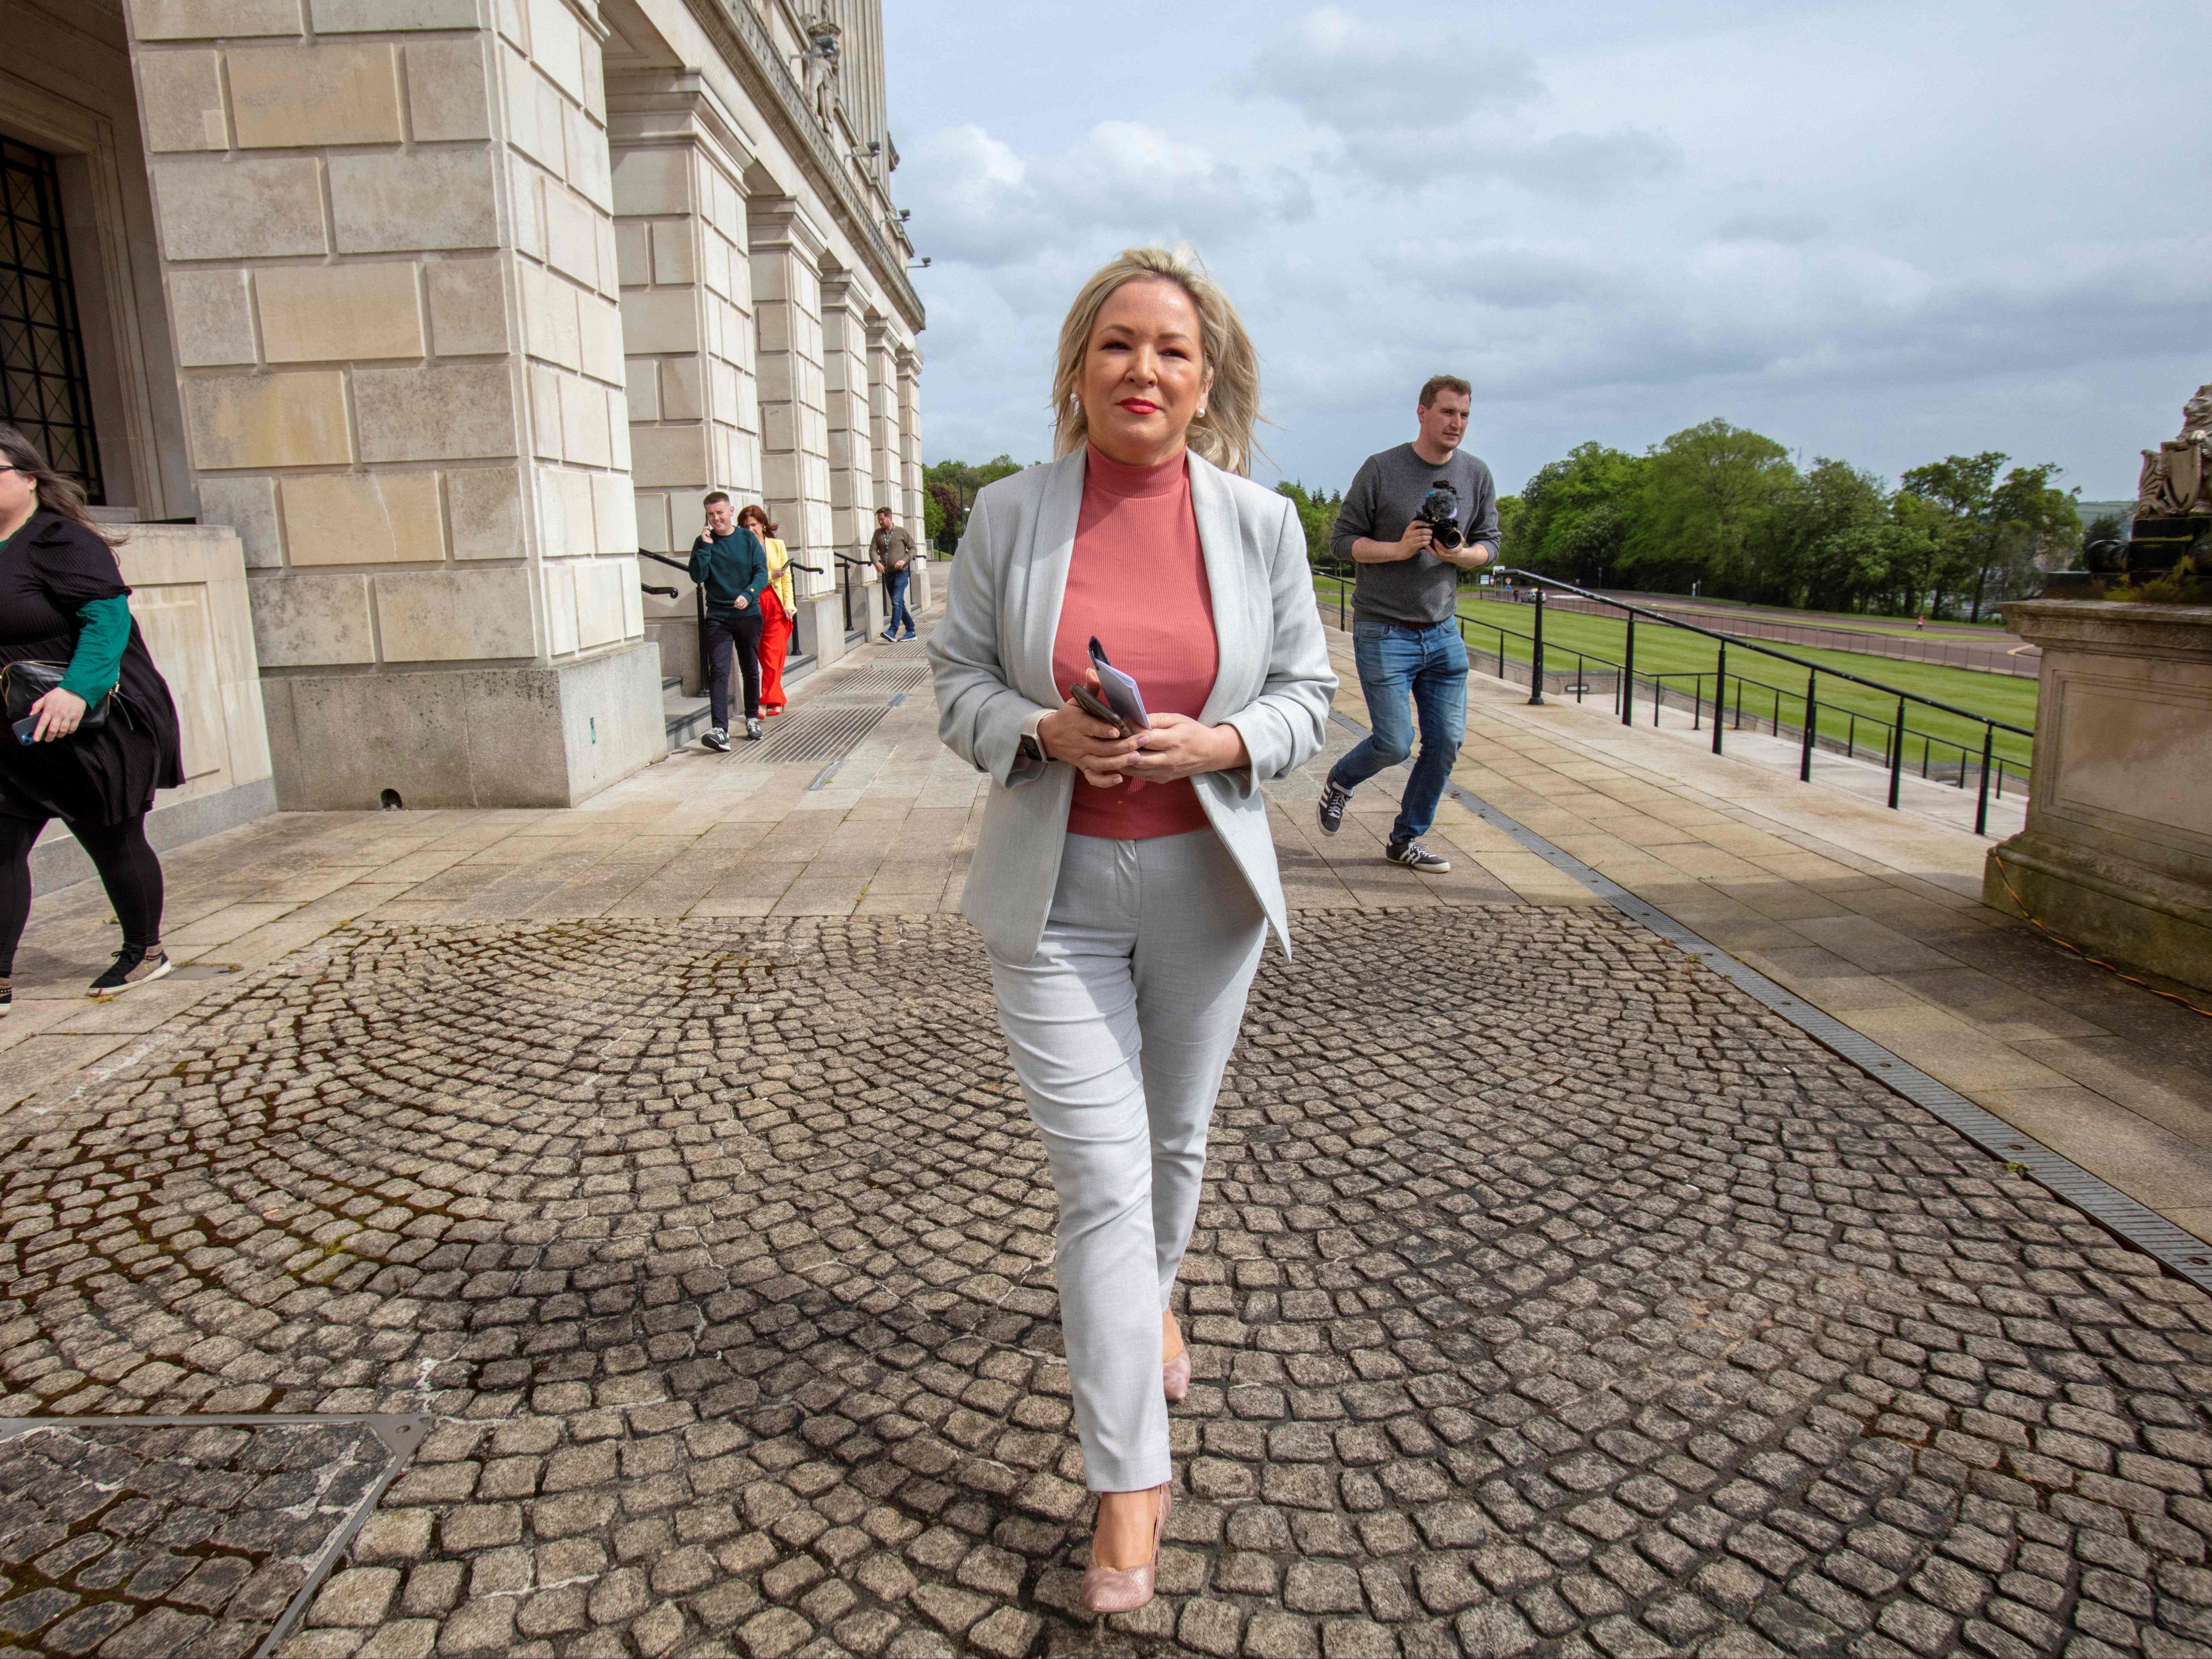 Michelle O’Neill said the Irish government had been ‘disorganised’ responding to the issue